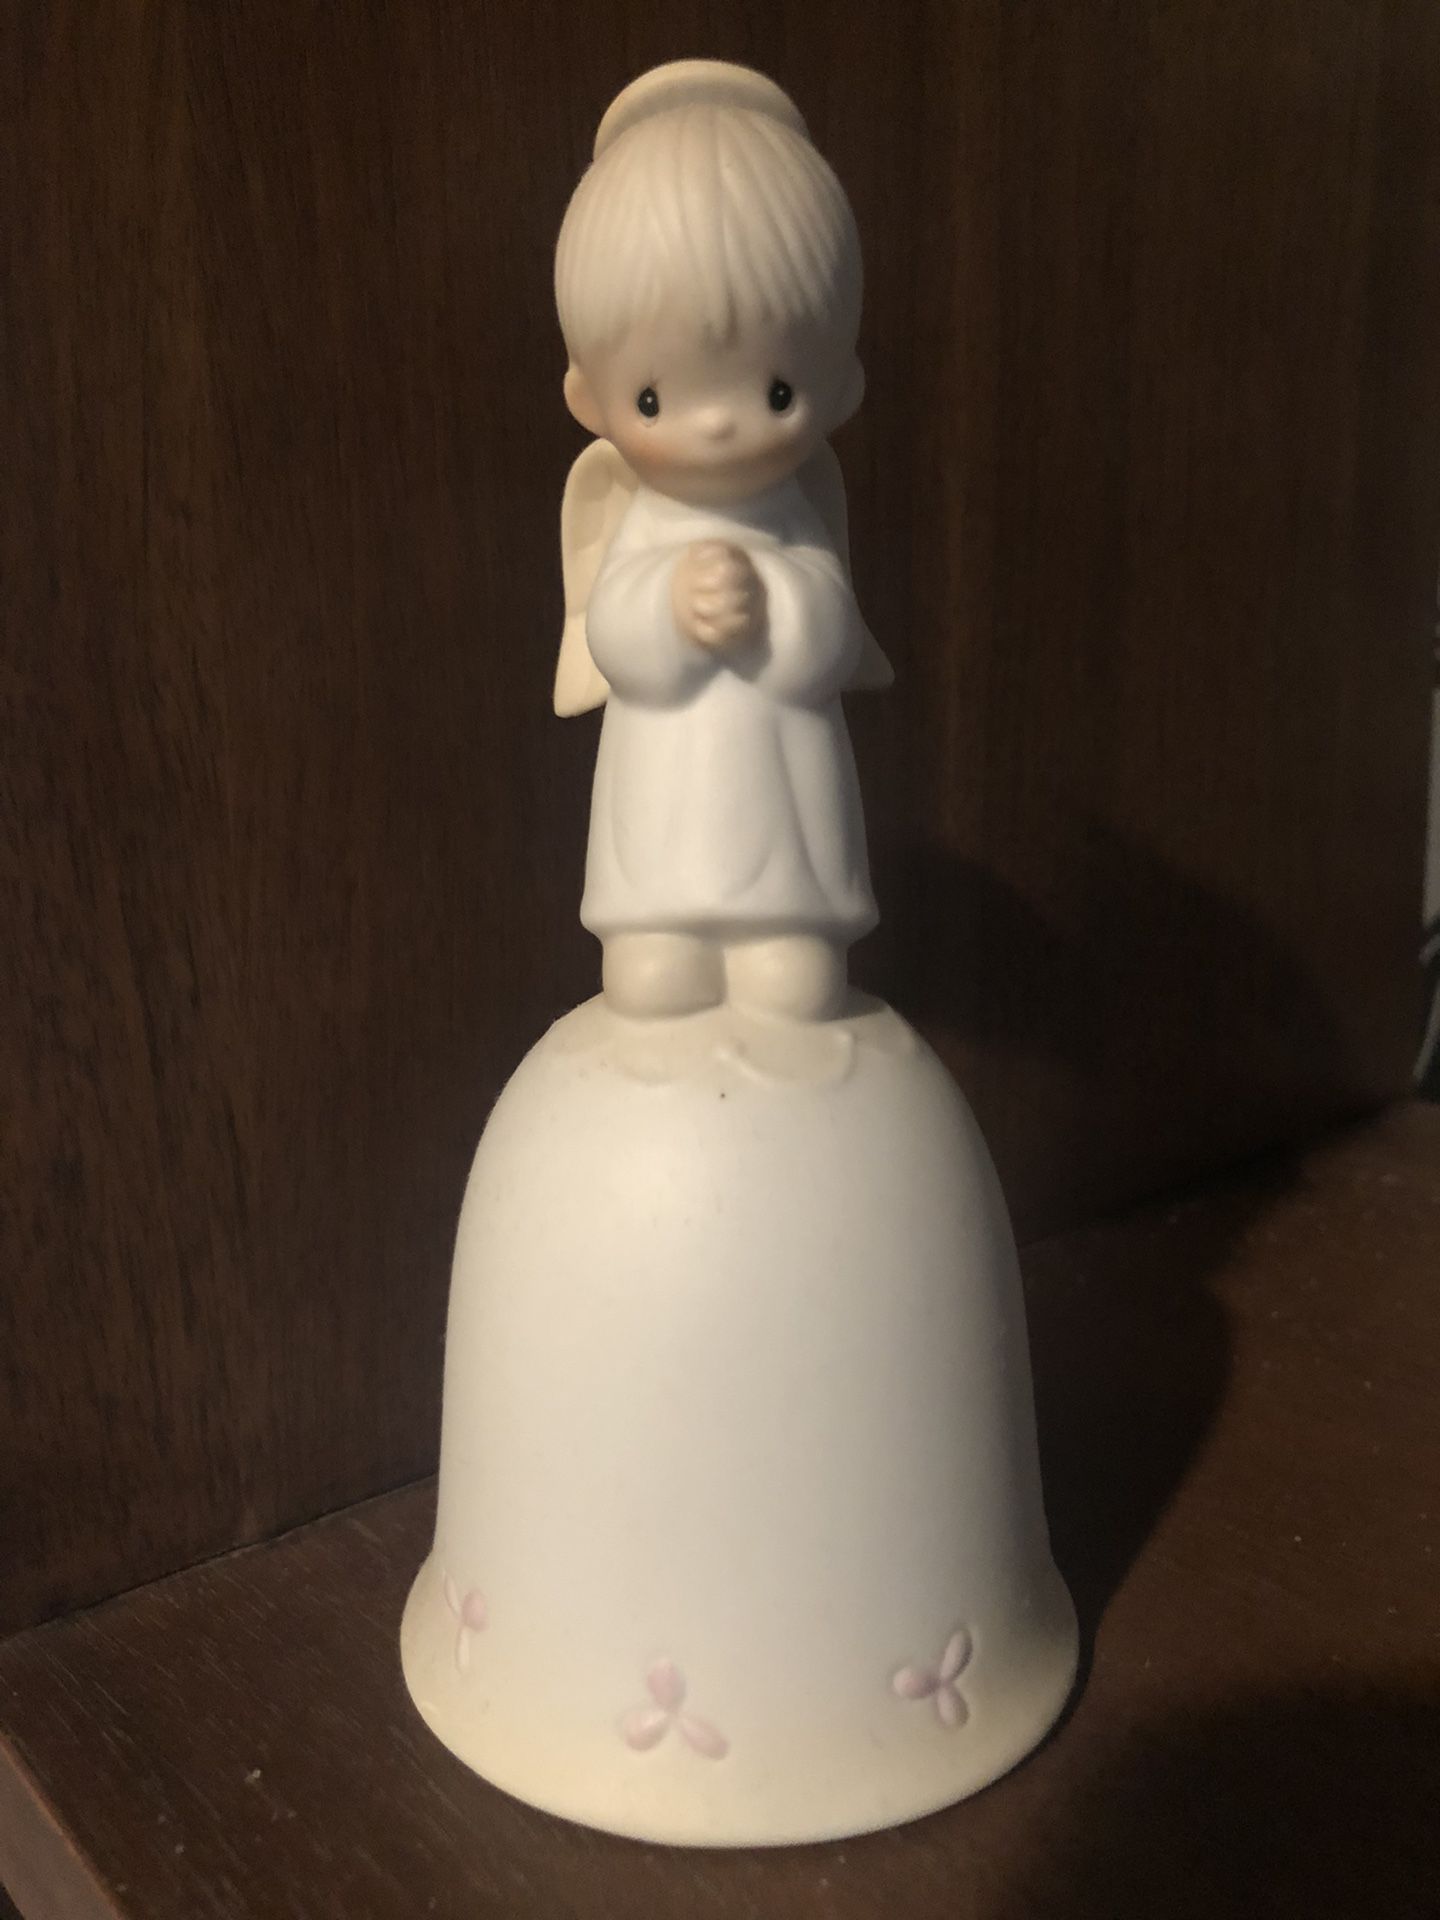 Vintage Precious Moments Bell - "Let The Heavens Rejoice" - 1981 Collector Bell - Closed 1981